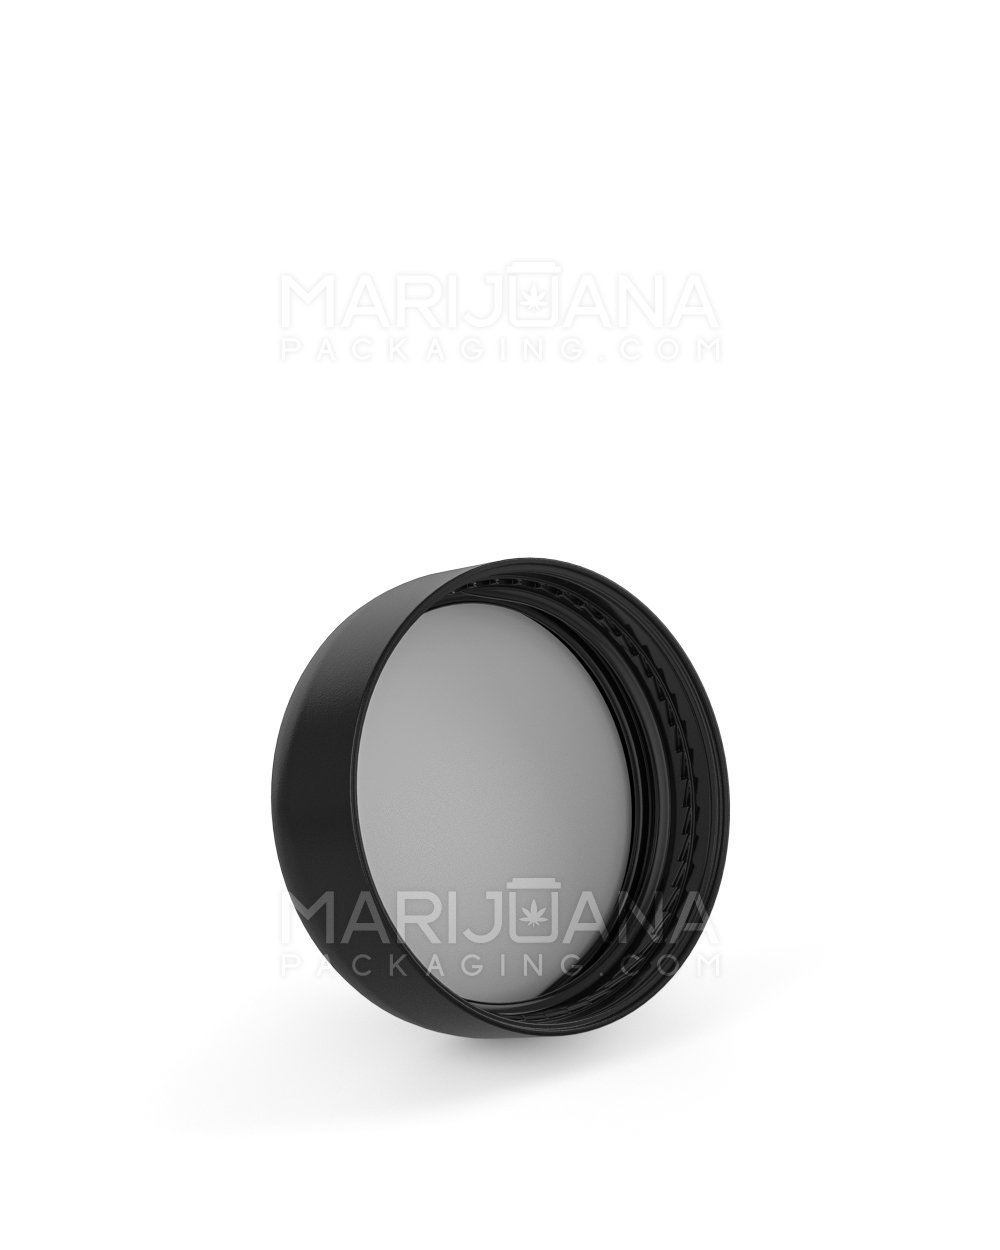 Child Resistant | Smooth Push Down & Turn Plastic Caps w/ Foam Liner | 32mm - Semi Gloss Black - 320 Count - 2